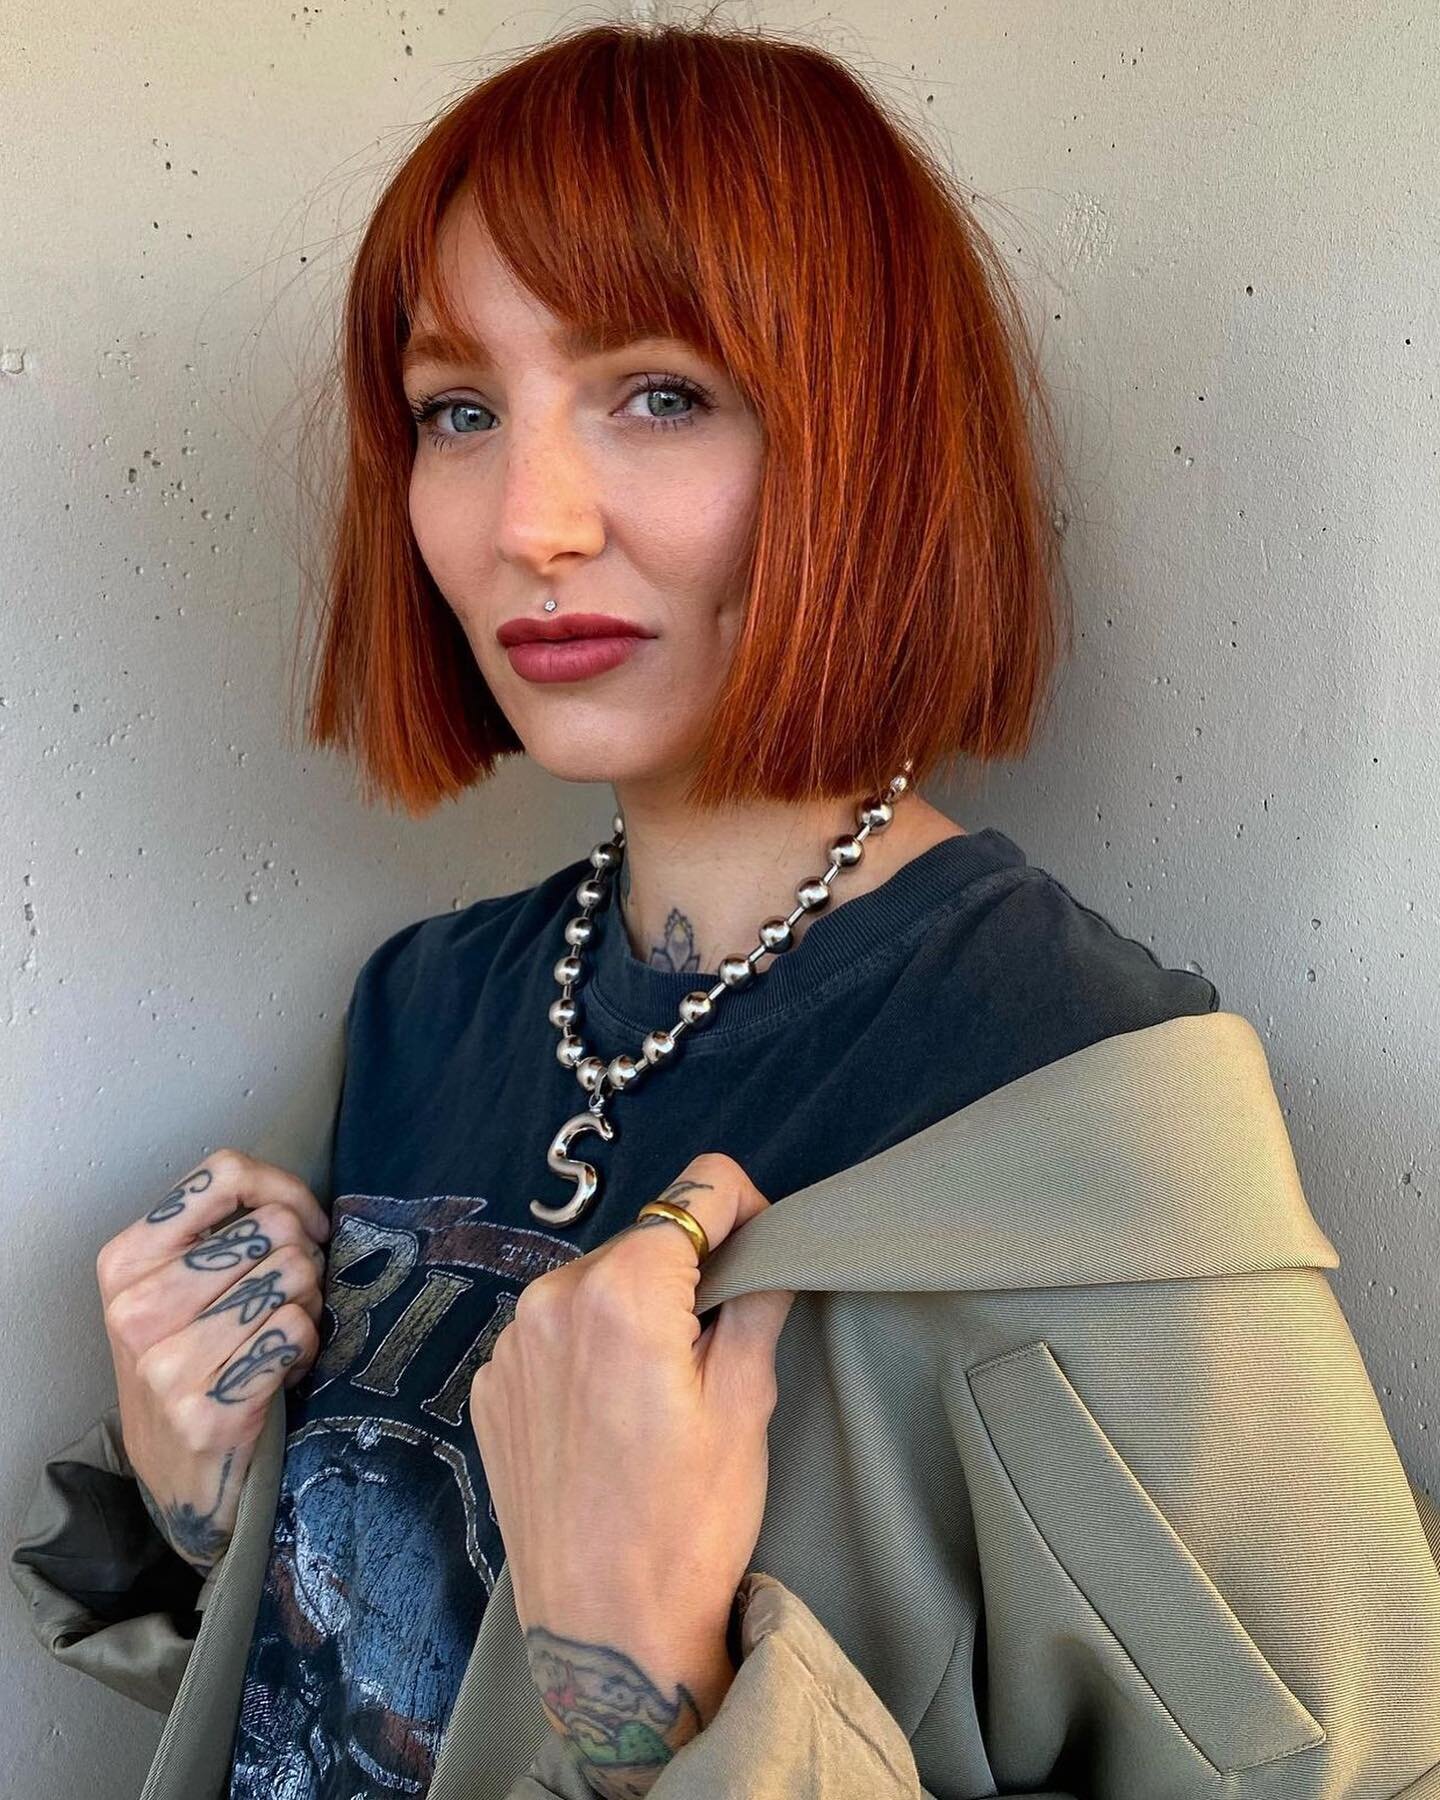 Sleek Straight Bob on Bombshell @shaughnessy styled with the #XOStylingIron by the one and only @chrisweberhair 🔥